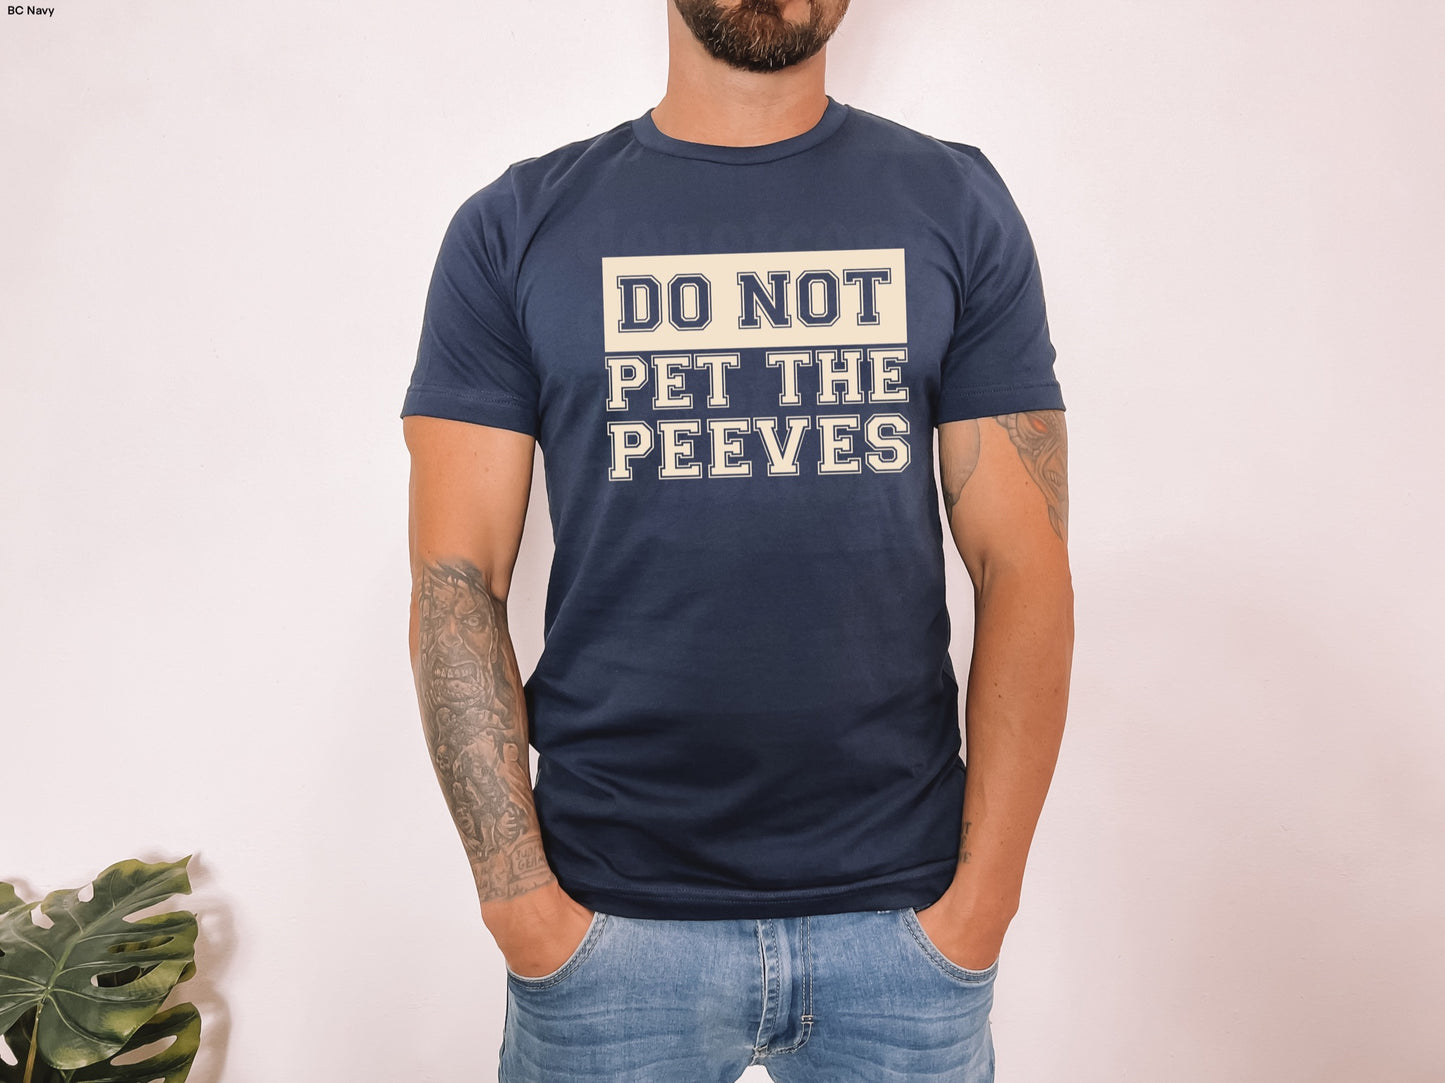 Don't Pet the Peeves